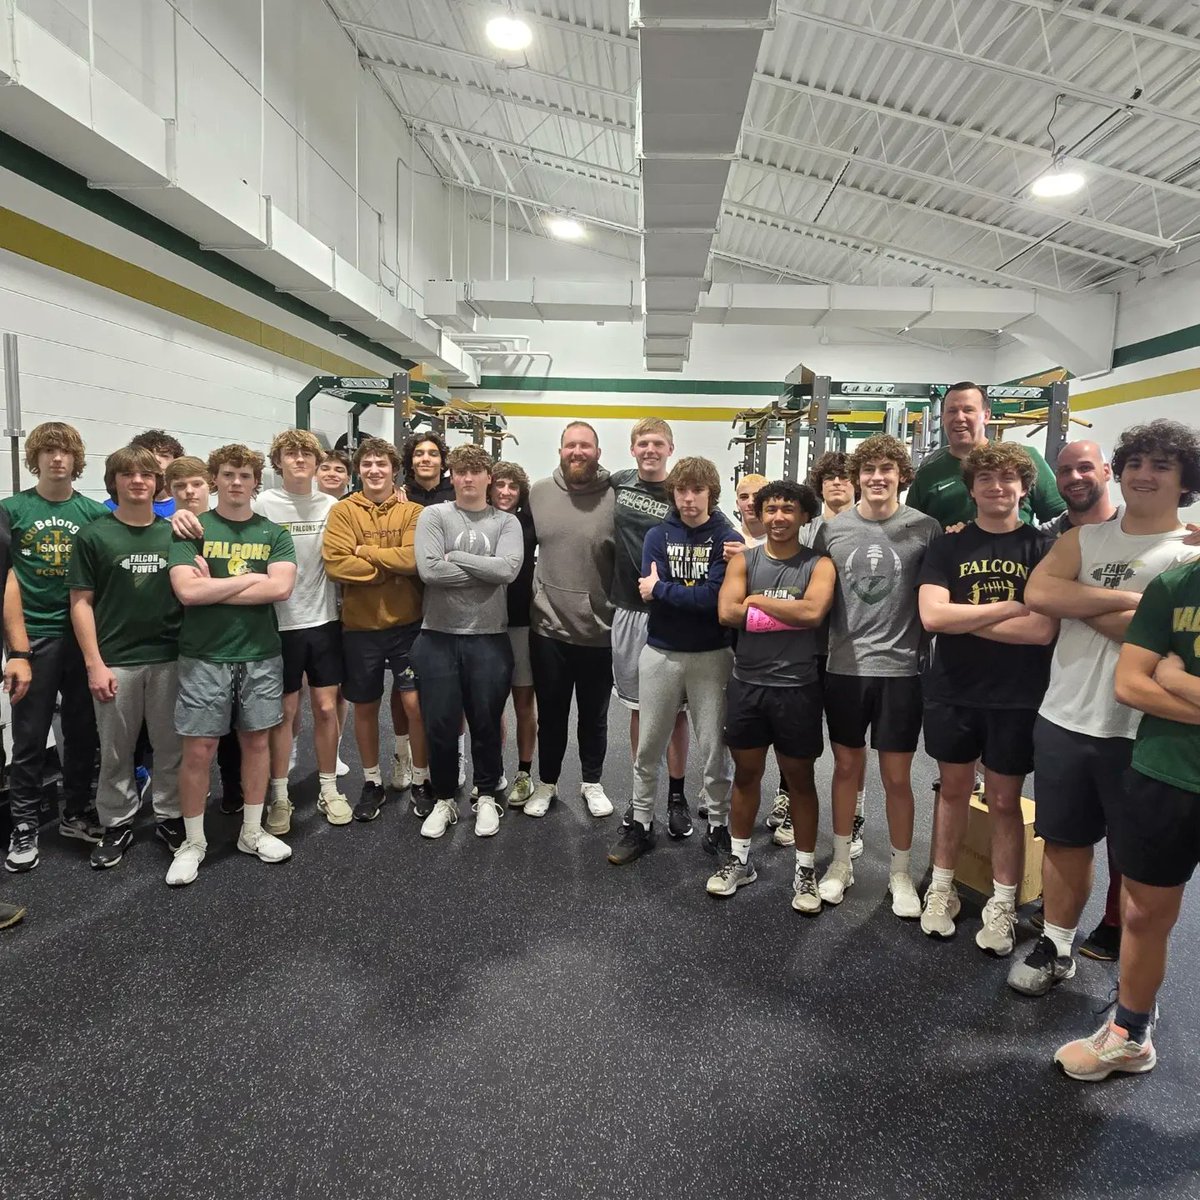 On Monday, @SMCC_Football had the honor and pleasure of hosting Wes French, of the @nfl @colts in our weight room. He talked to these young men about the importance of working out and having a great diet in order to be successful. Thank you, Wes! #smccfalconfootball